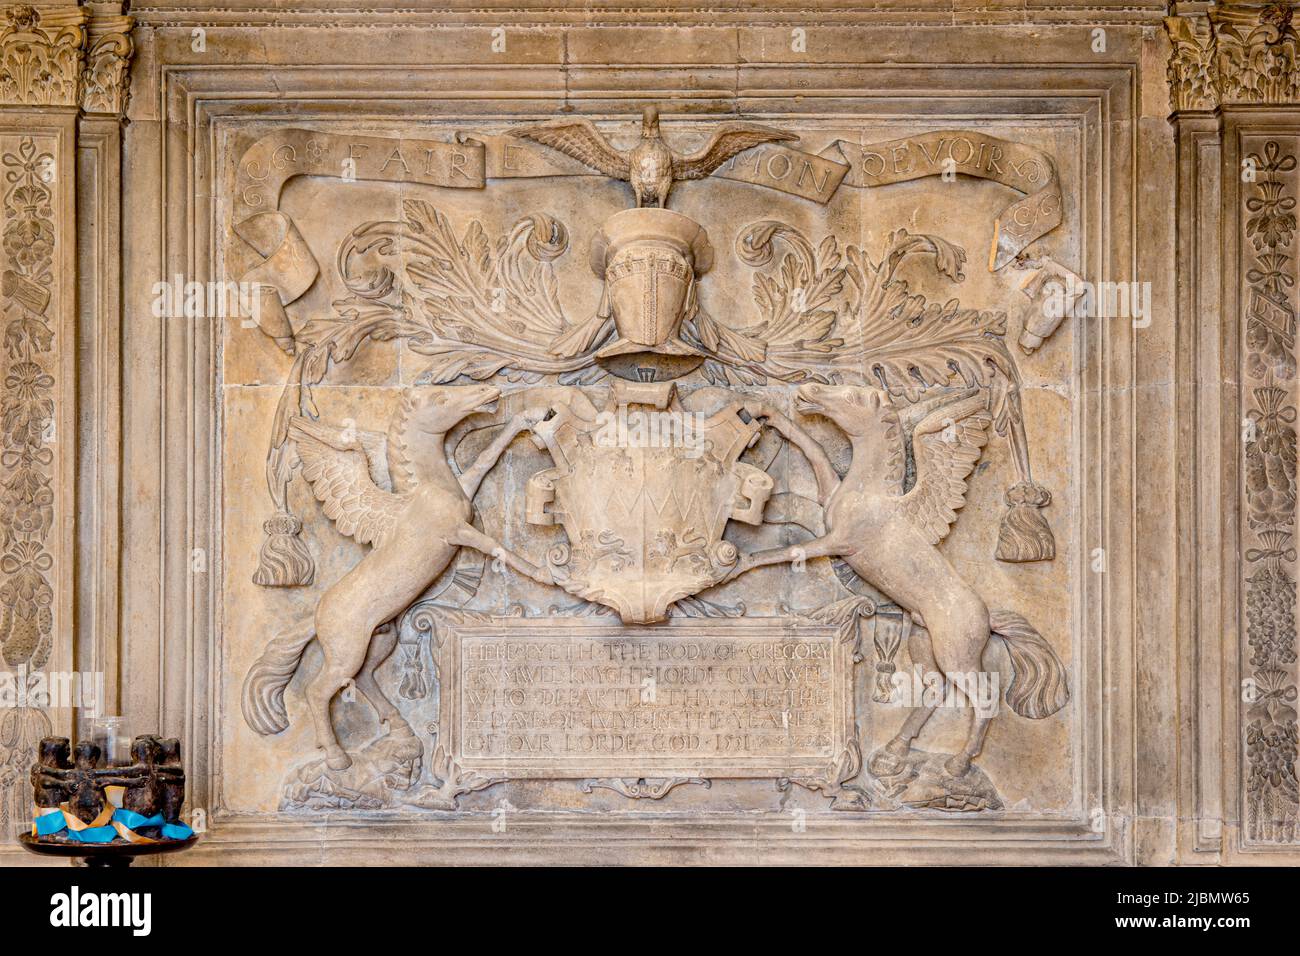 Section of Gregory Cromwell's tomb monument, ornate sculpture in the early renaissance - Launde Abbey Stock Photo